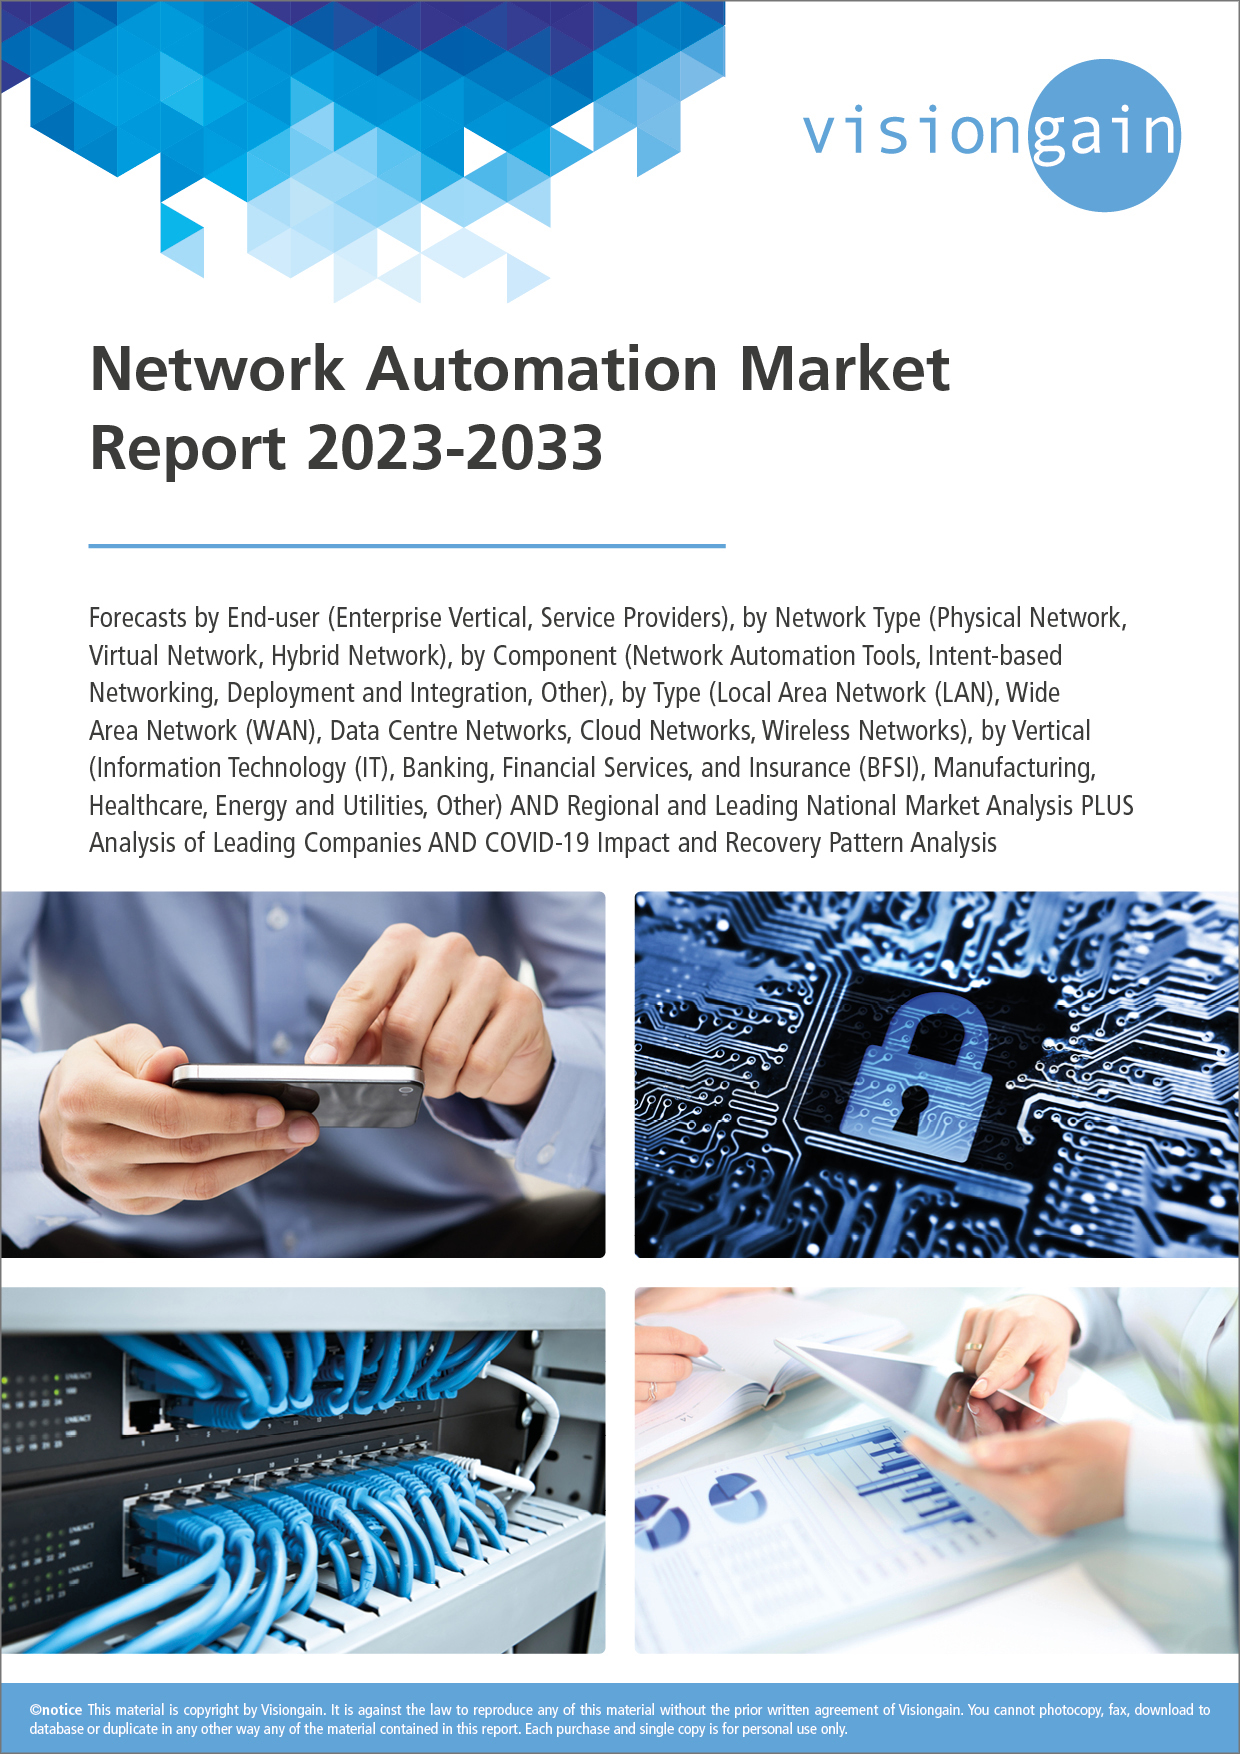 Network Automation Market Report 2023-2033